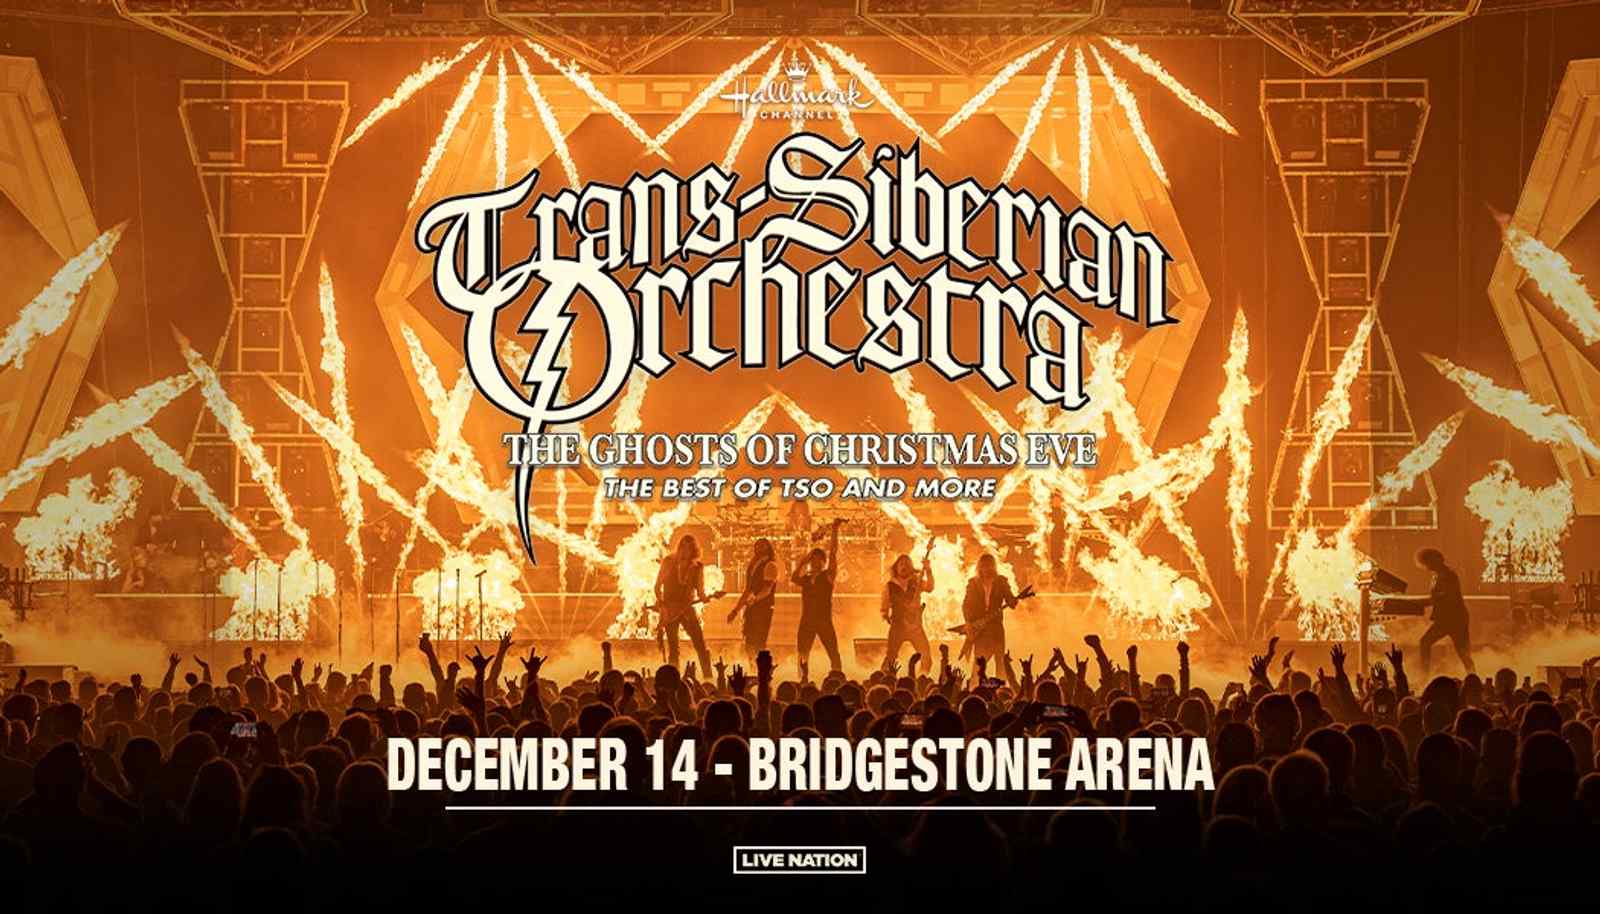 Trans-Siberian Orchestra The Ghosts of Christmas Eve